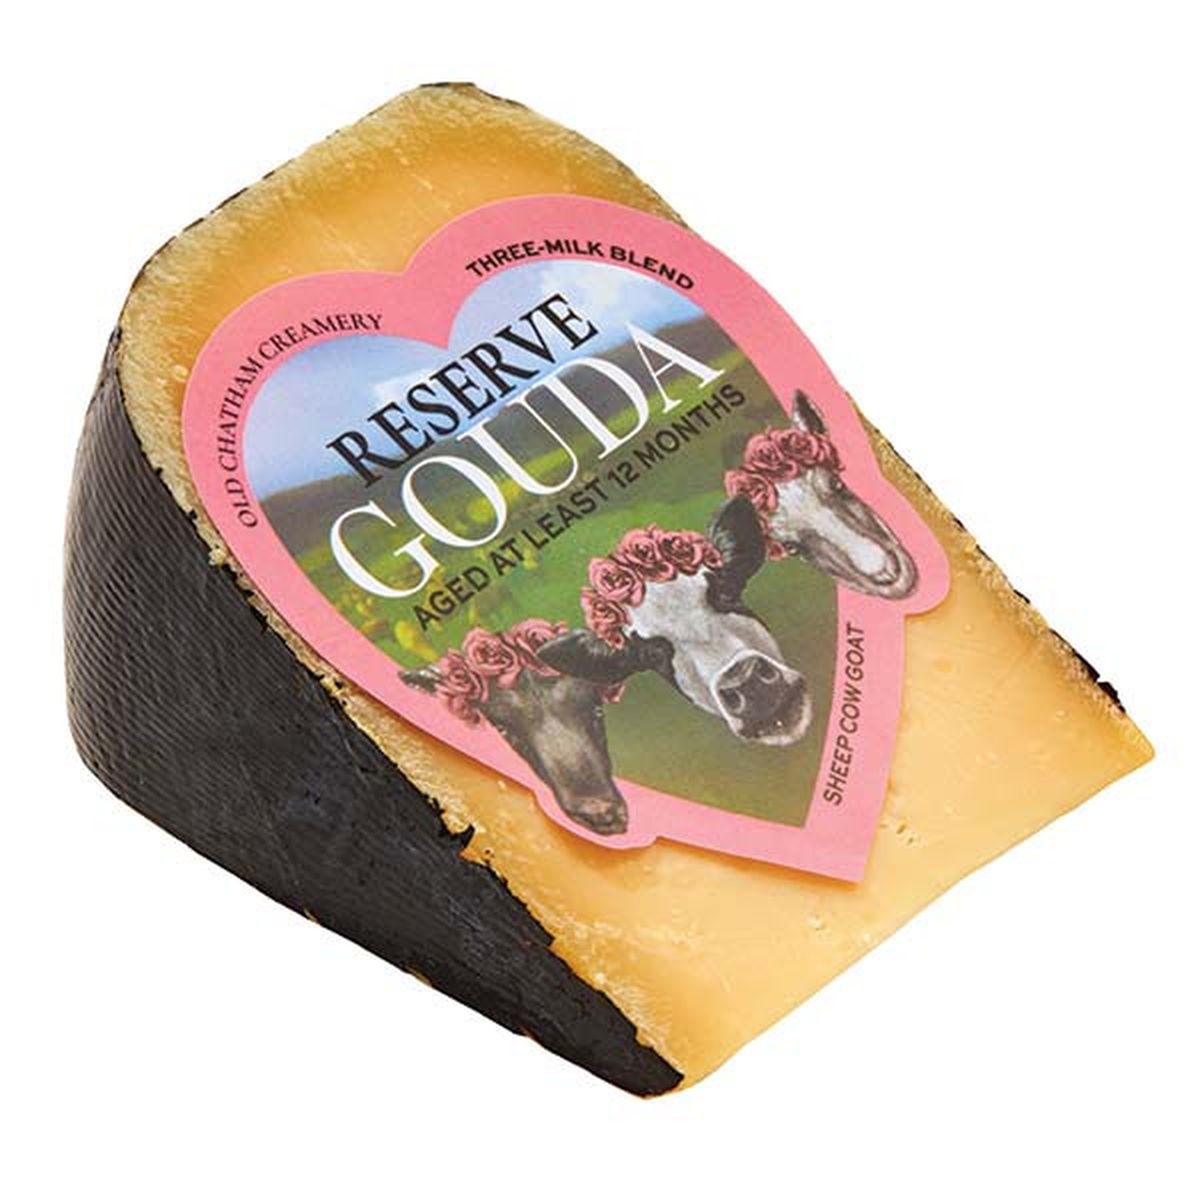 Calories in Old Chatham 3 Milk 12 Month Gouda